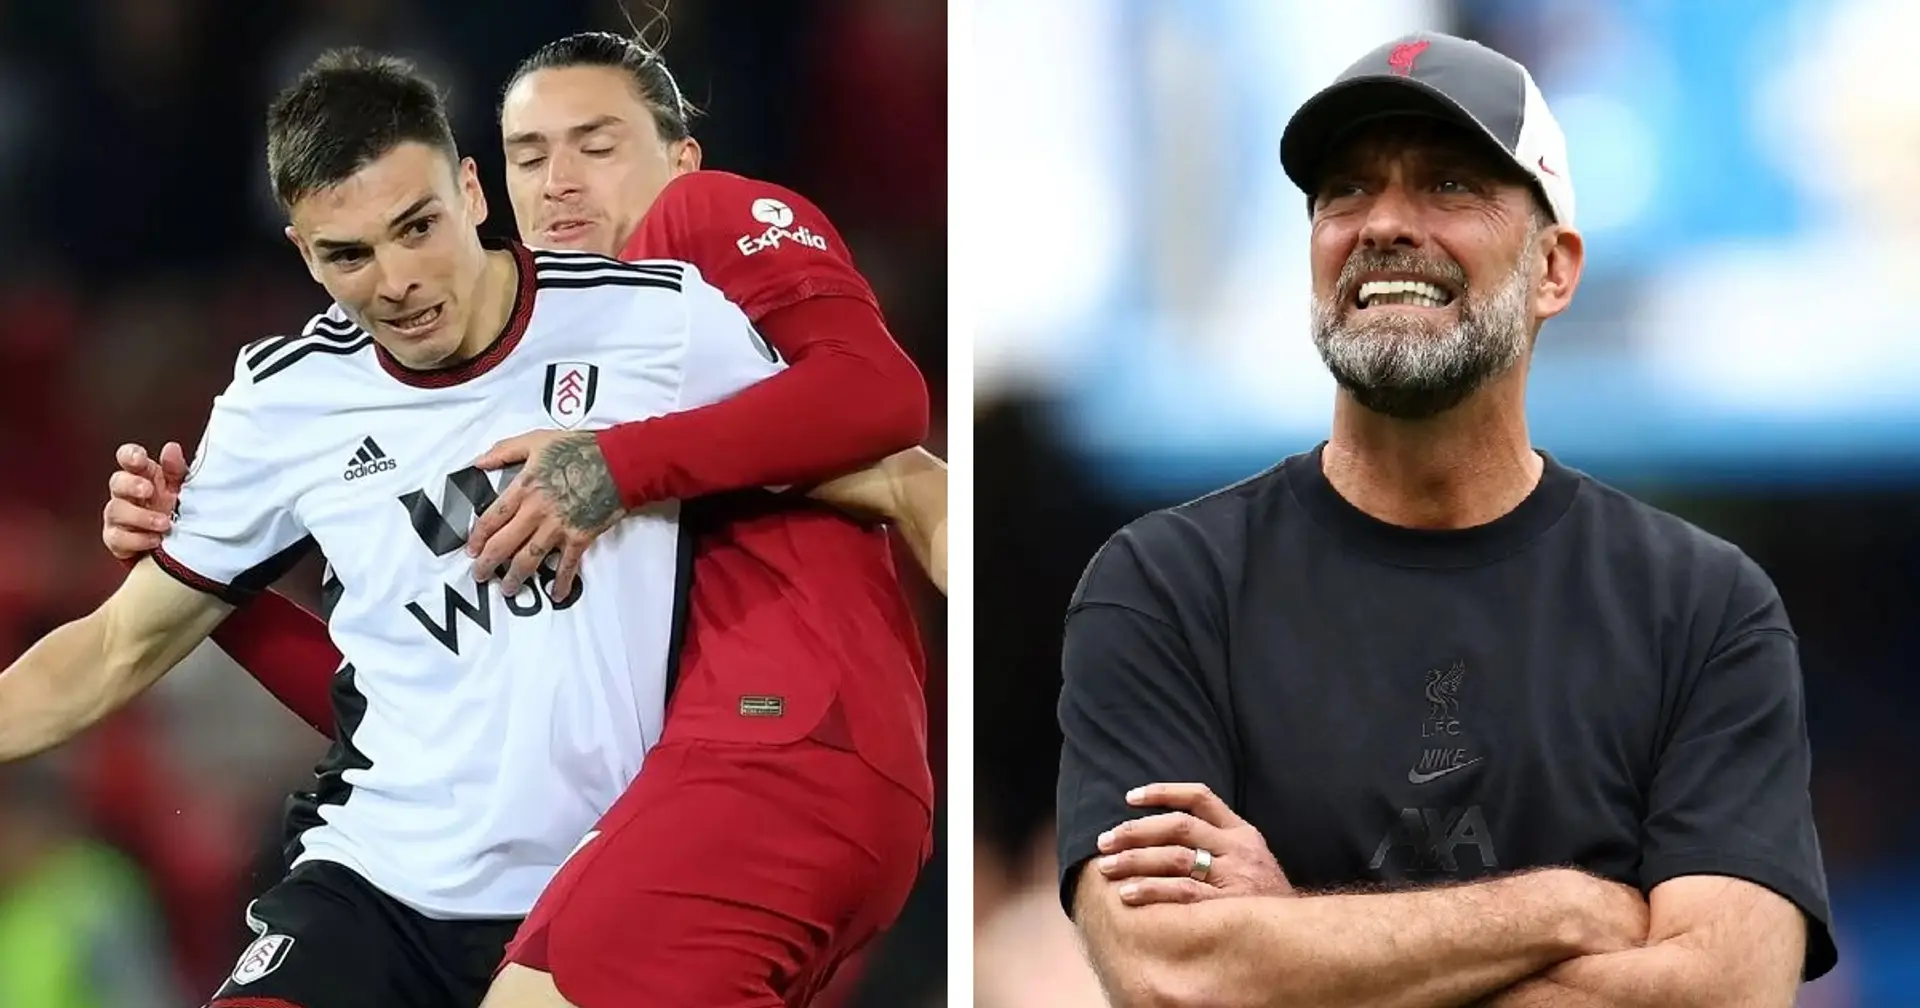 Liverpool eyeing Fulham midfielder as Lavia alternative but remain wary of £60m price tag (reliability: 4 stars)